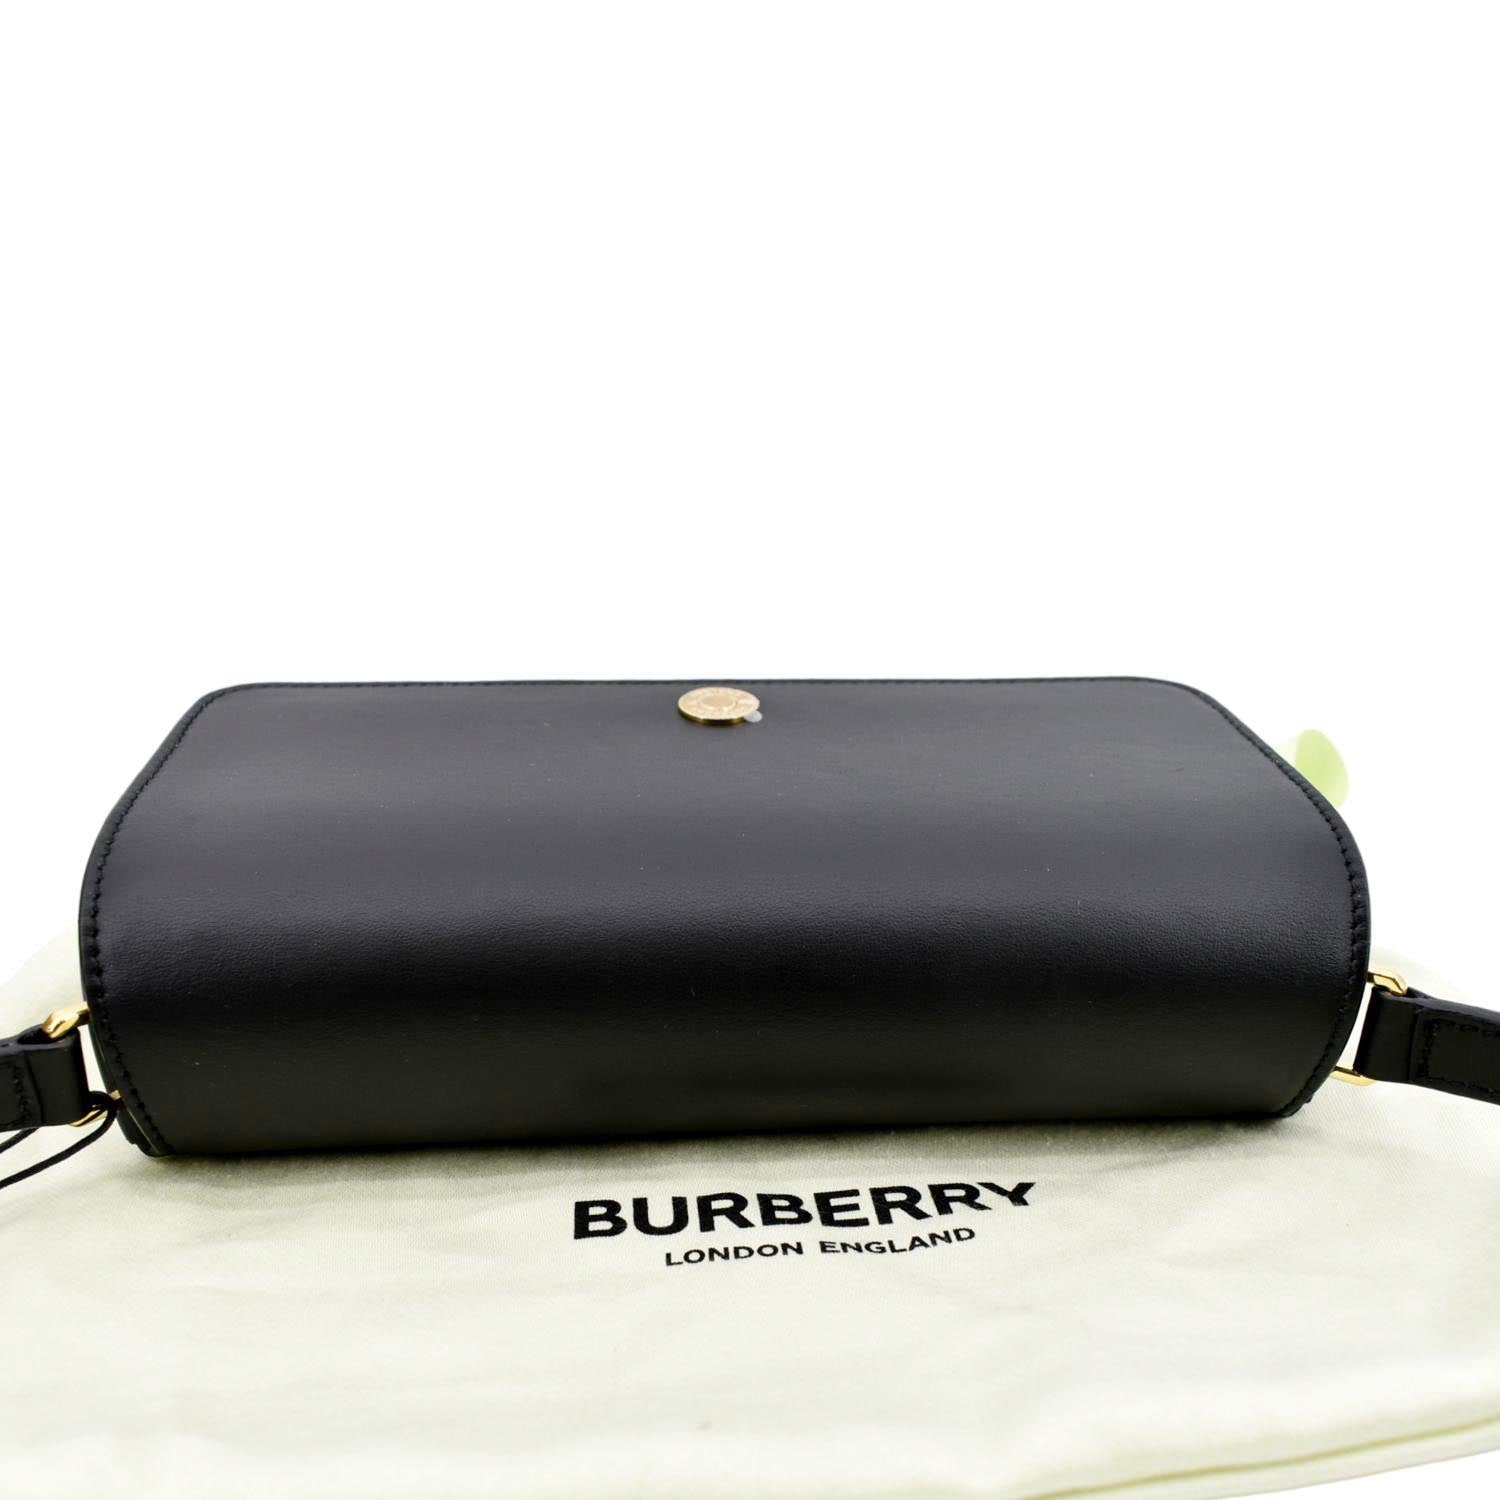 Burberry Medium Note Crossbody Bag in Bright Red Dusty Pink